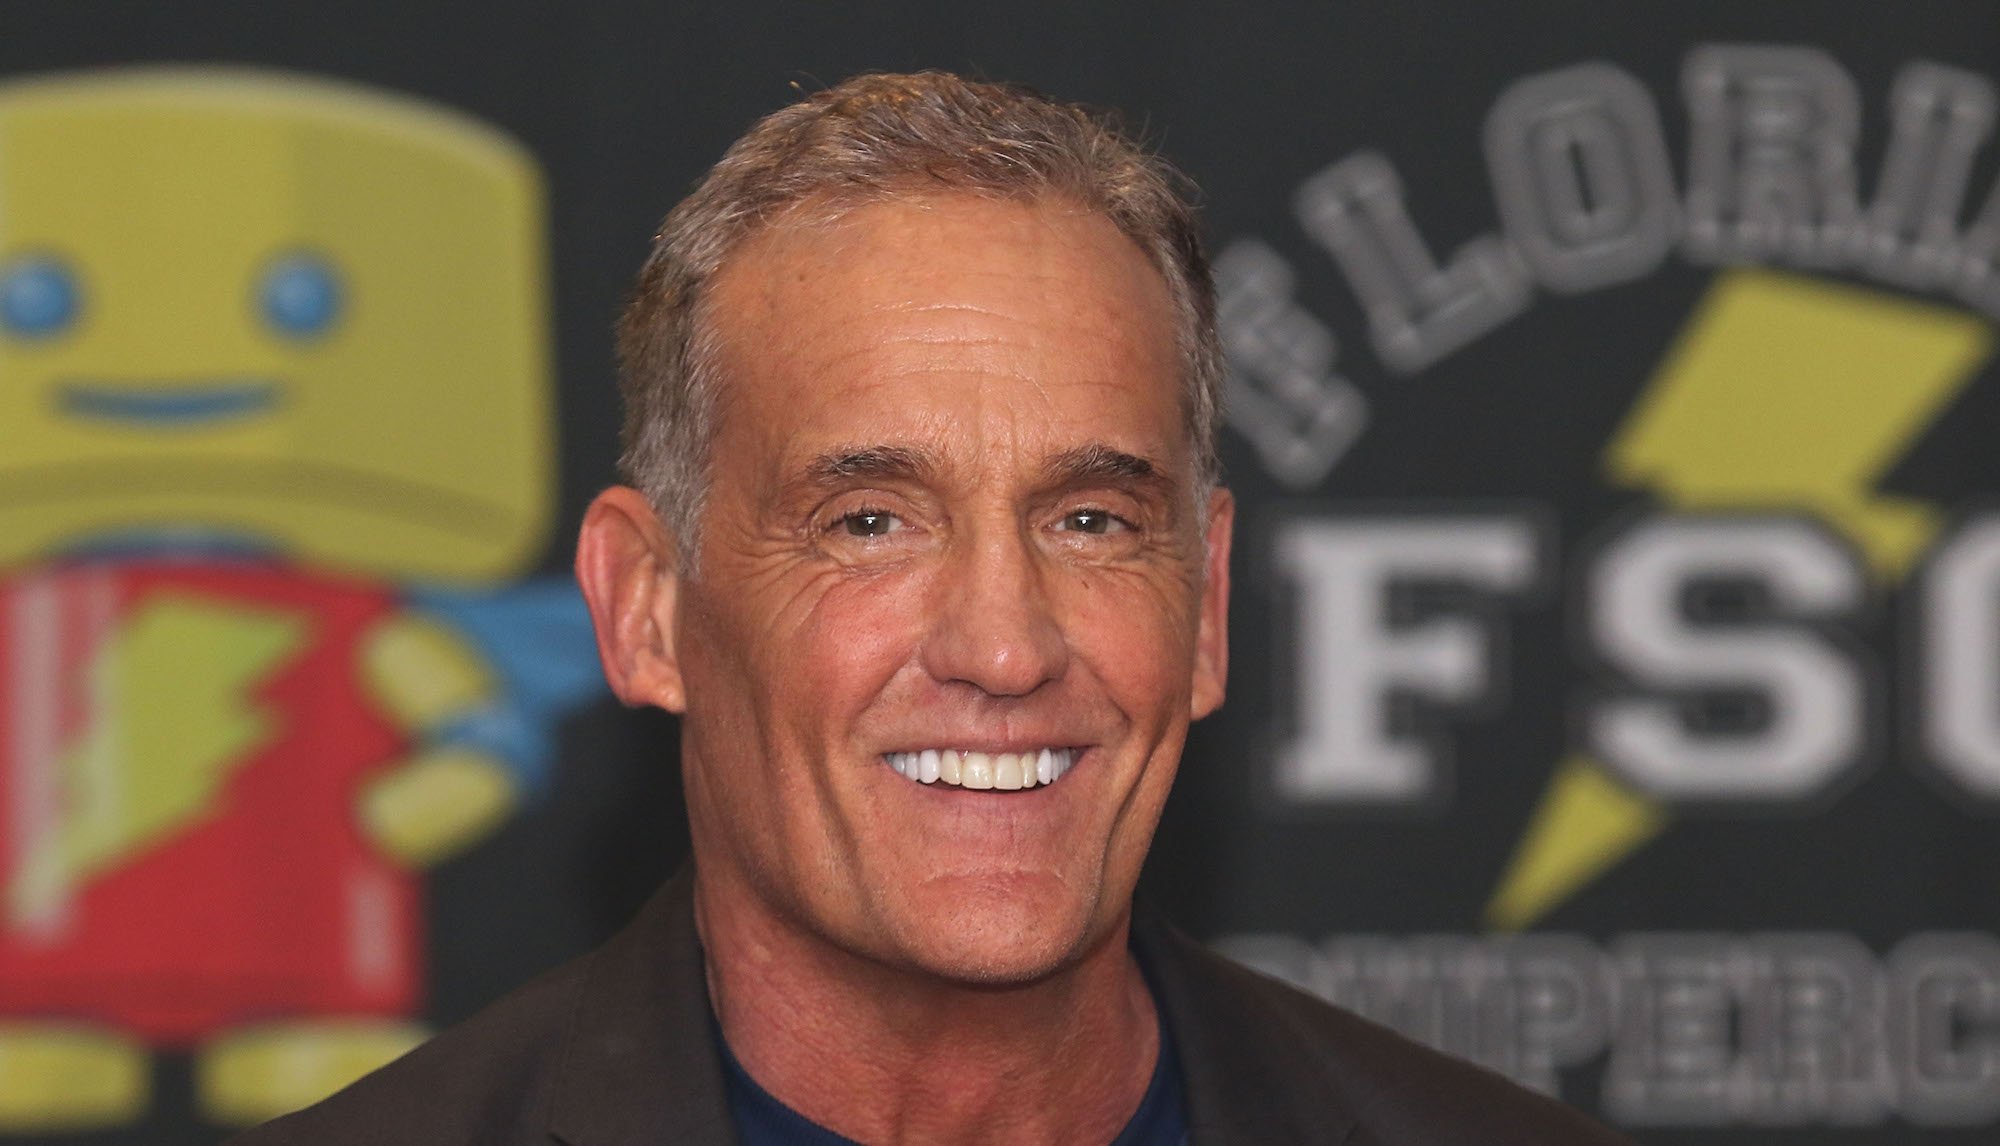 John Wesley Shipp smiling in front of a blurred background